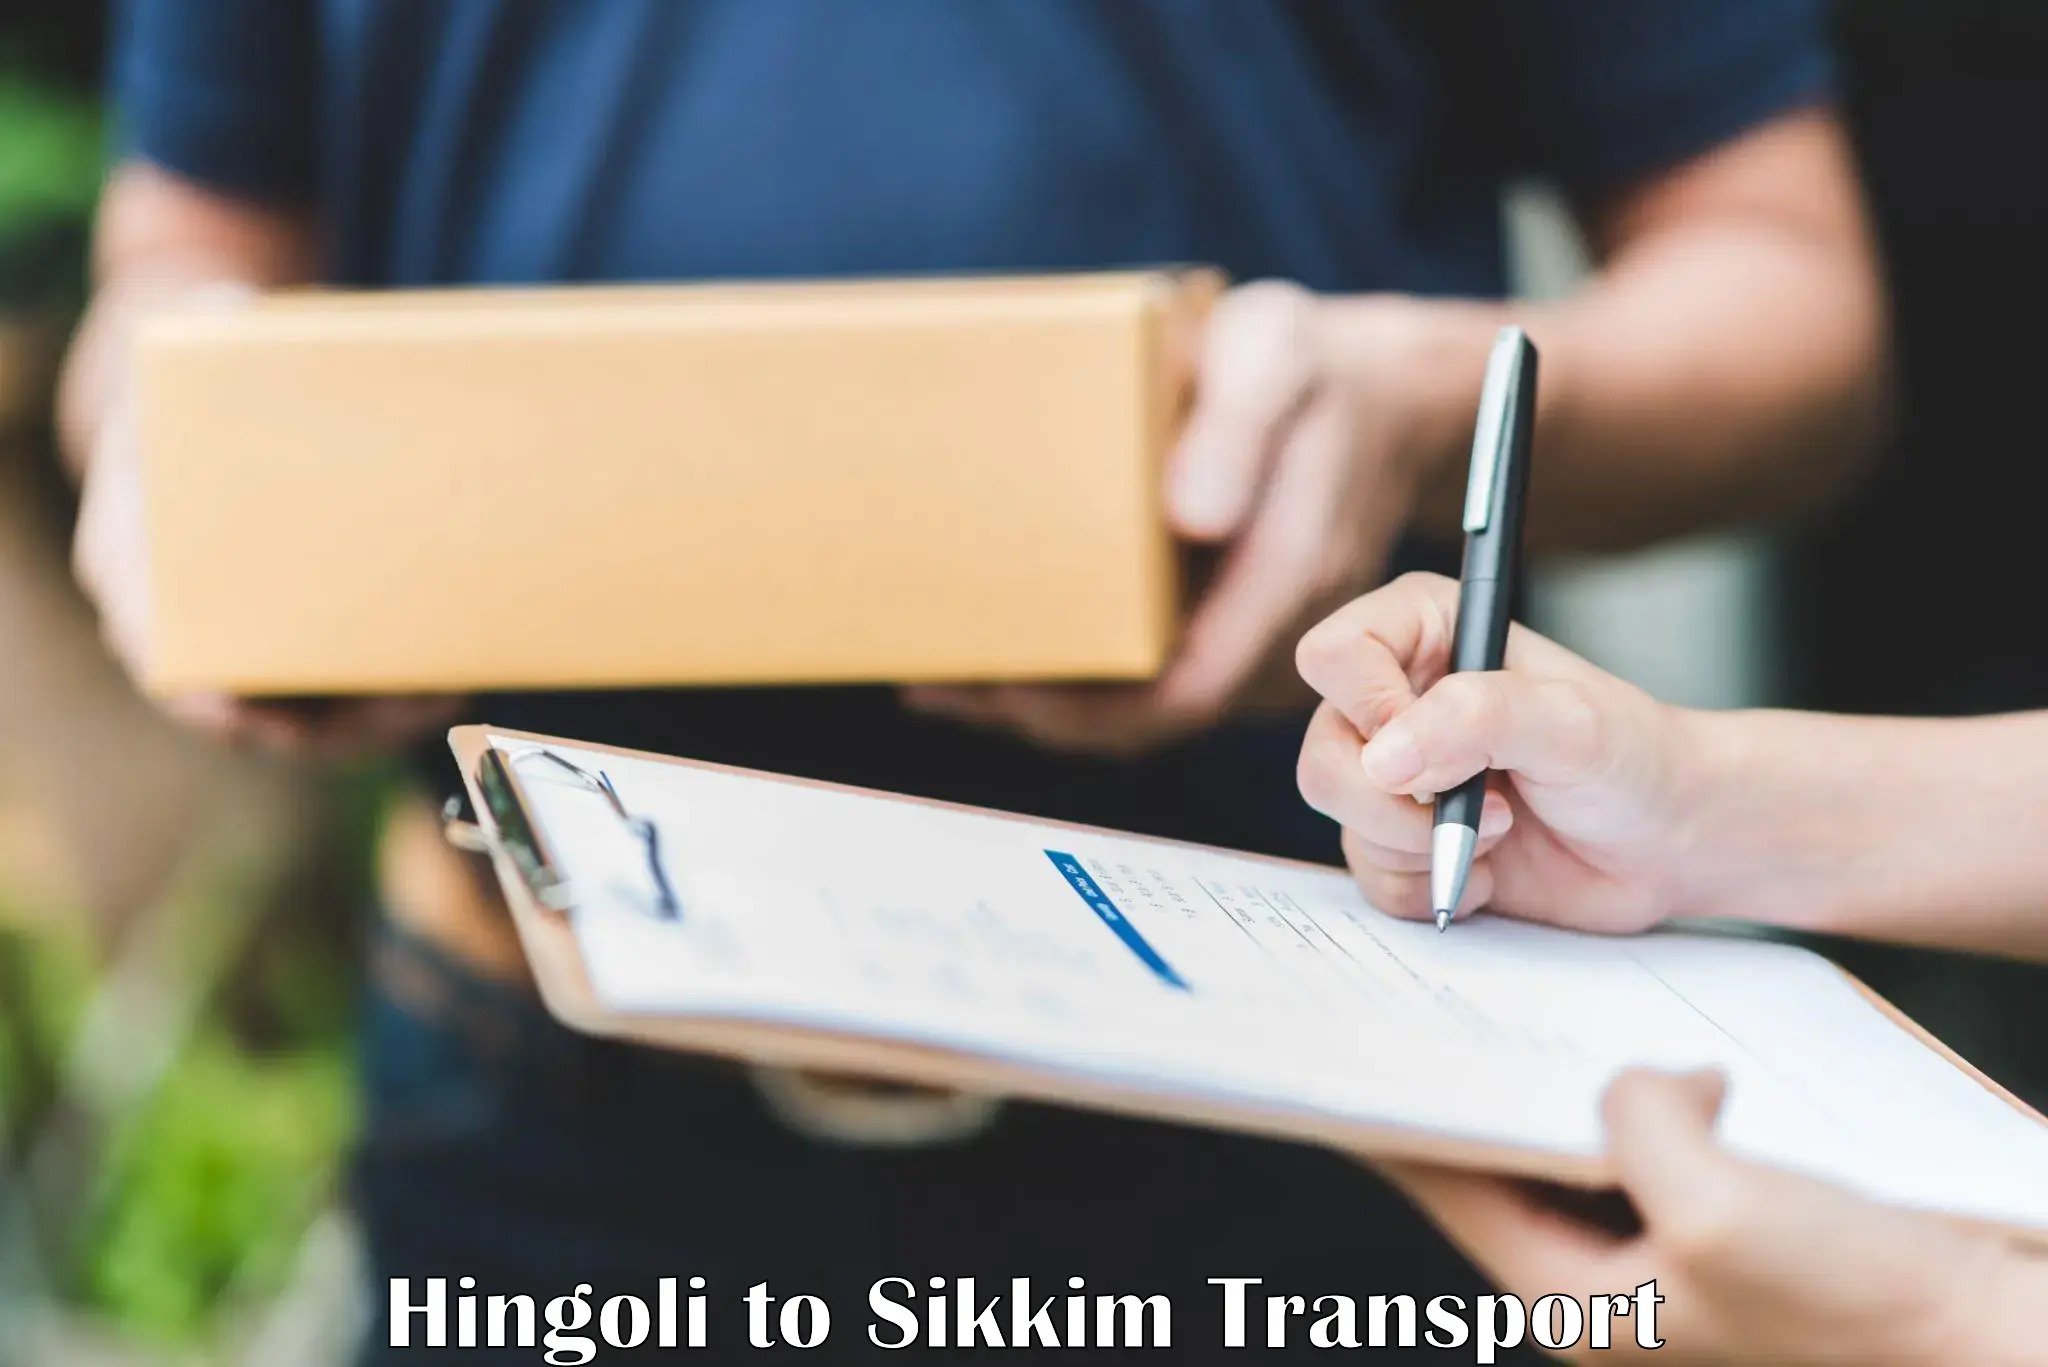 Container transport service Hingoli to Gangtok